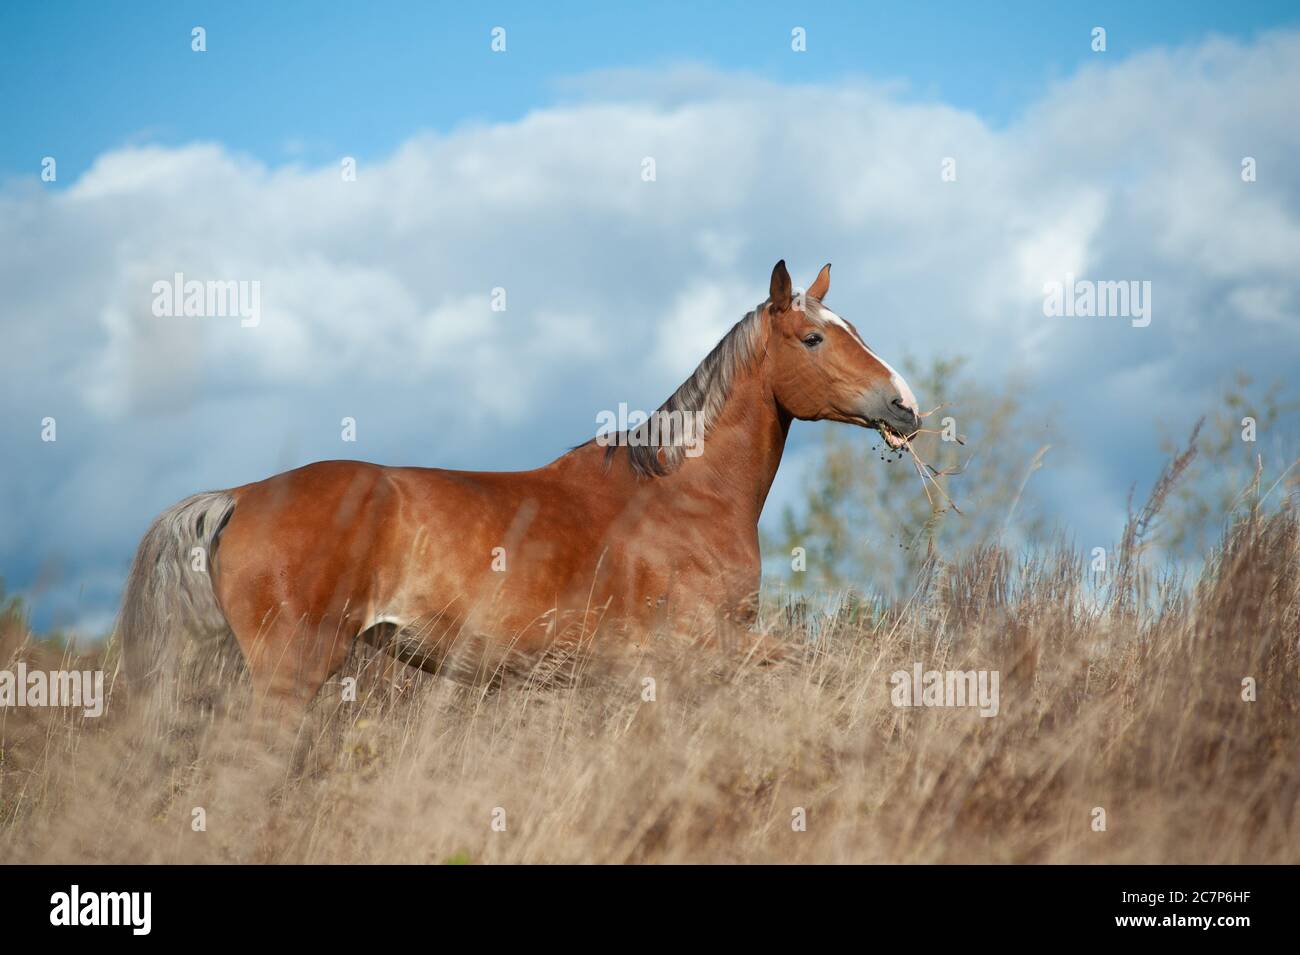 Palomino horse in the field grazing on freedom Stock Photo